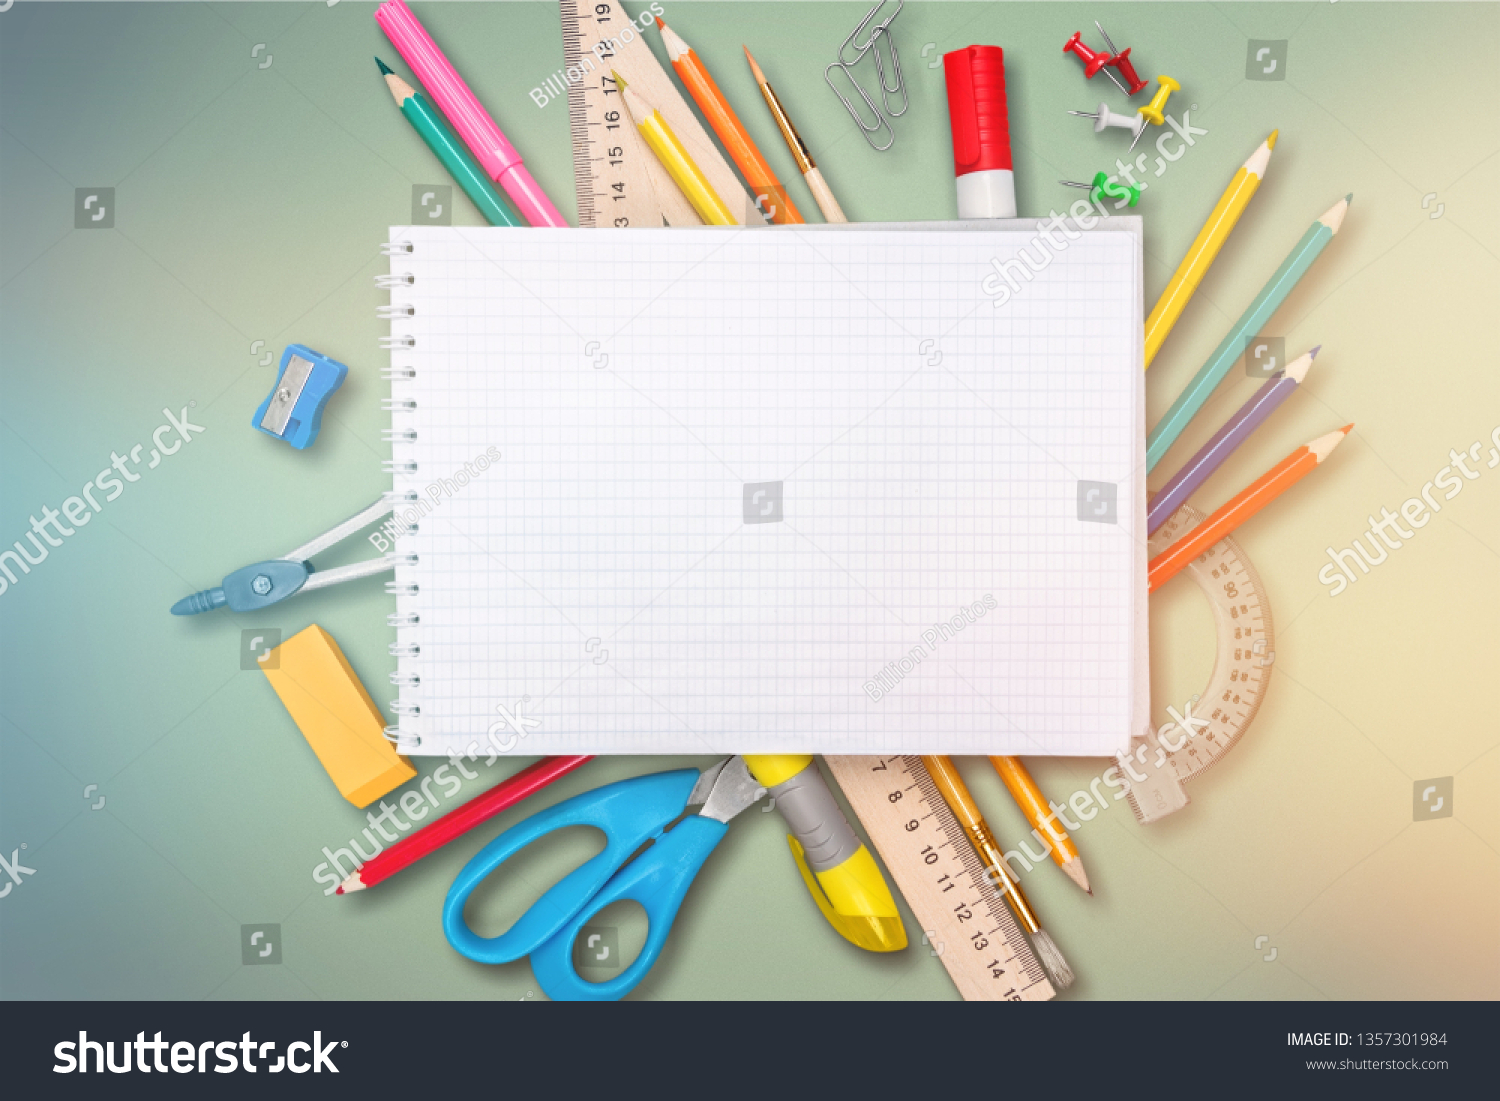 Colorful school supplies on wooden table background #1357301984